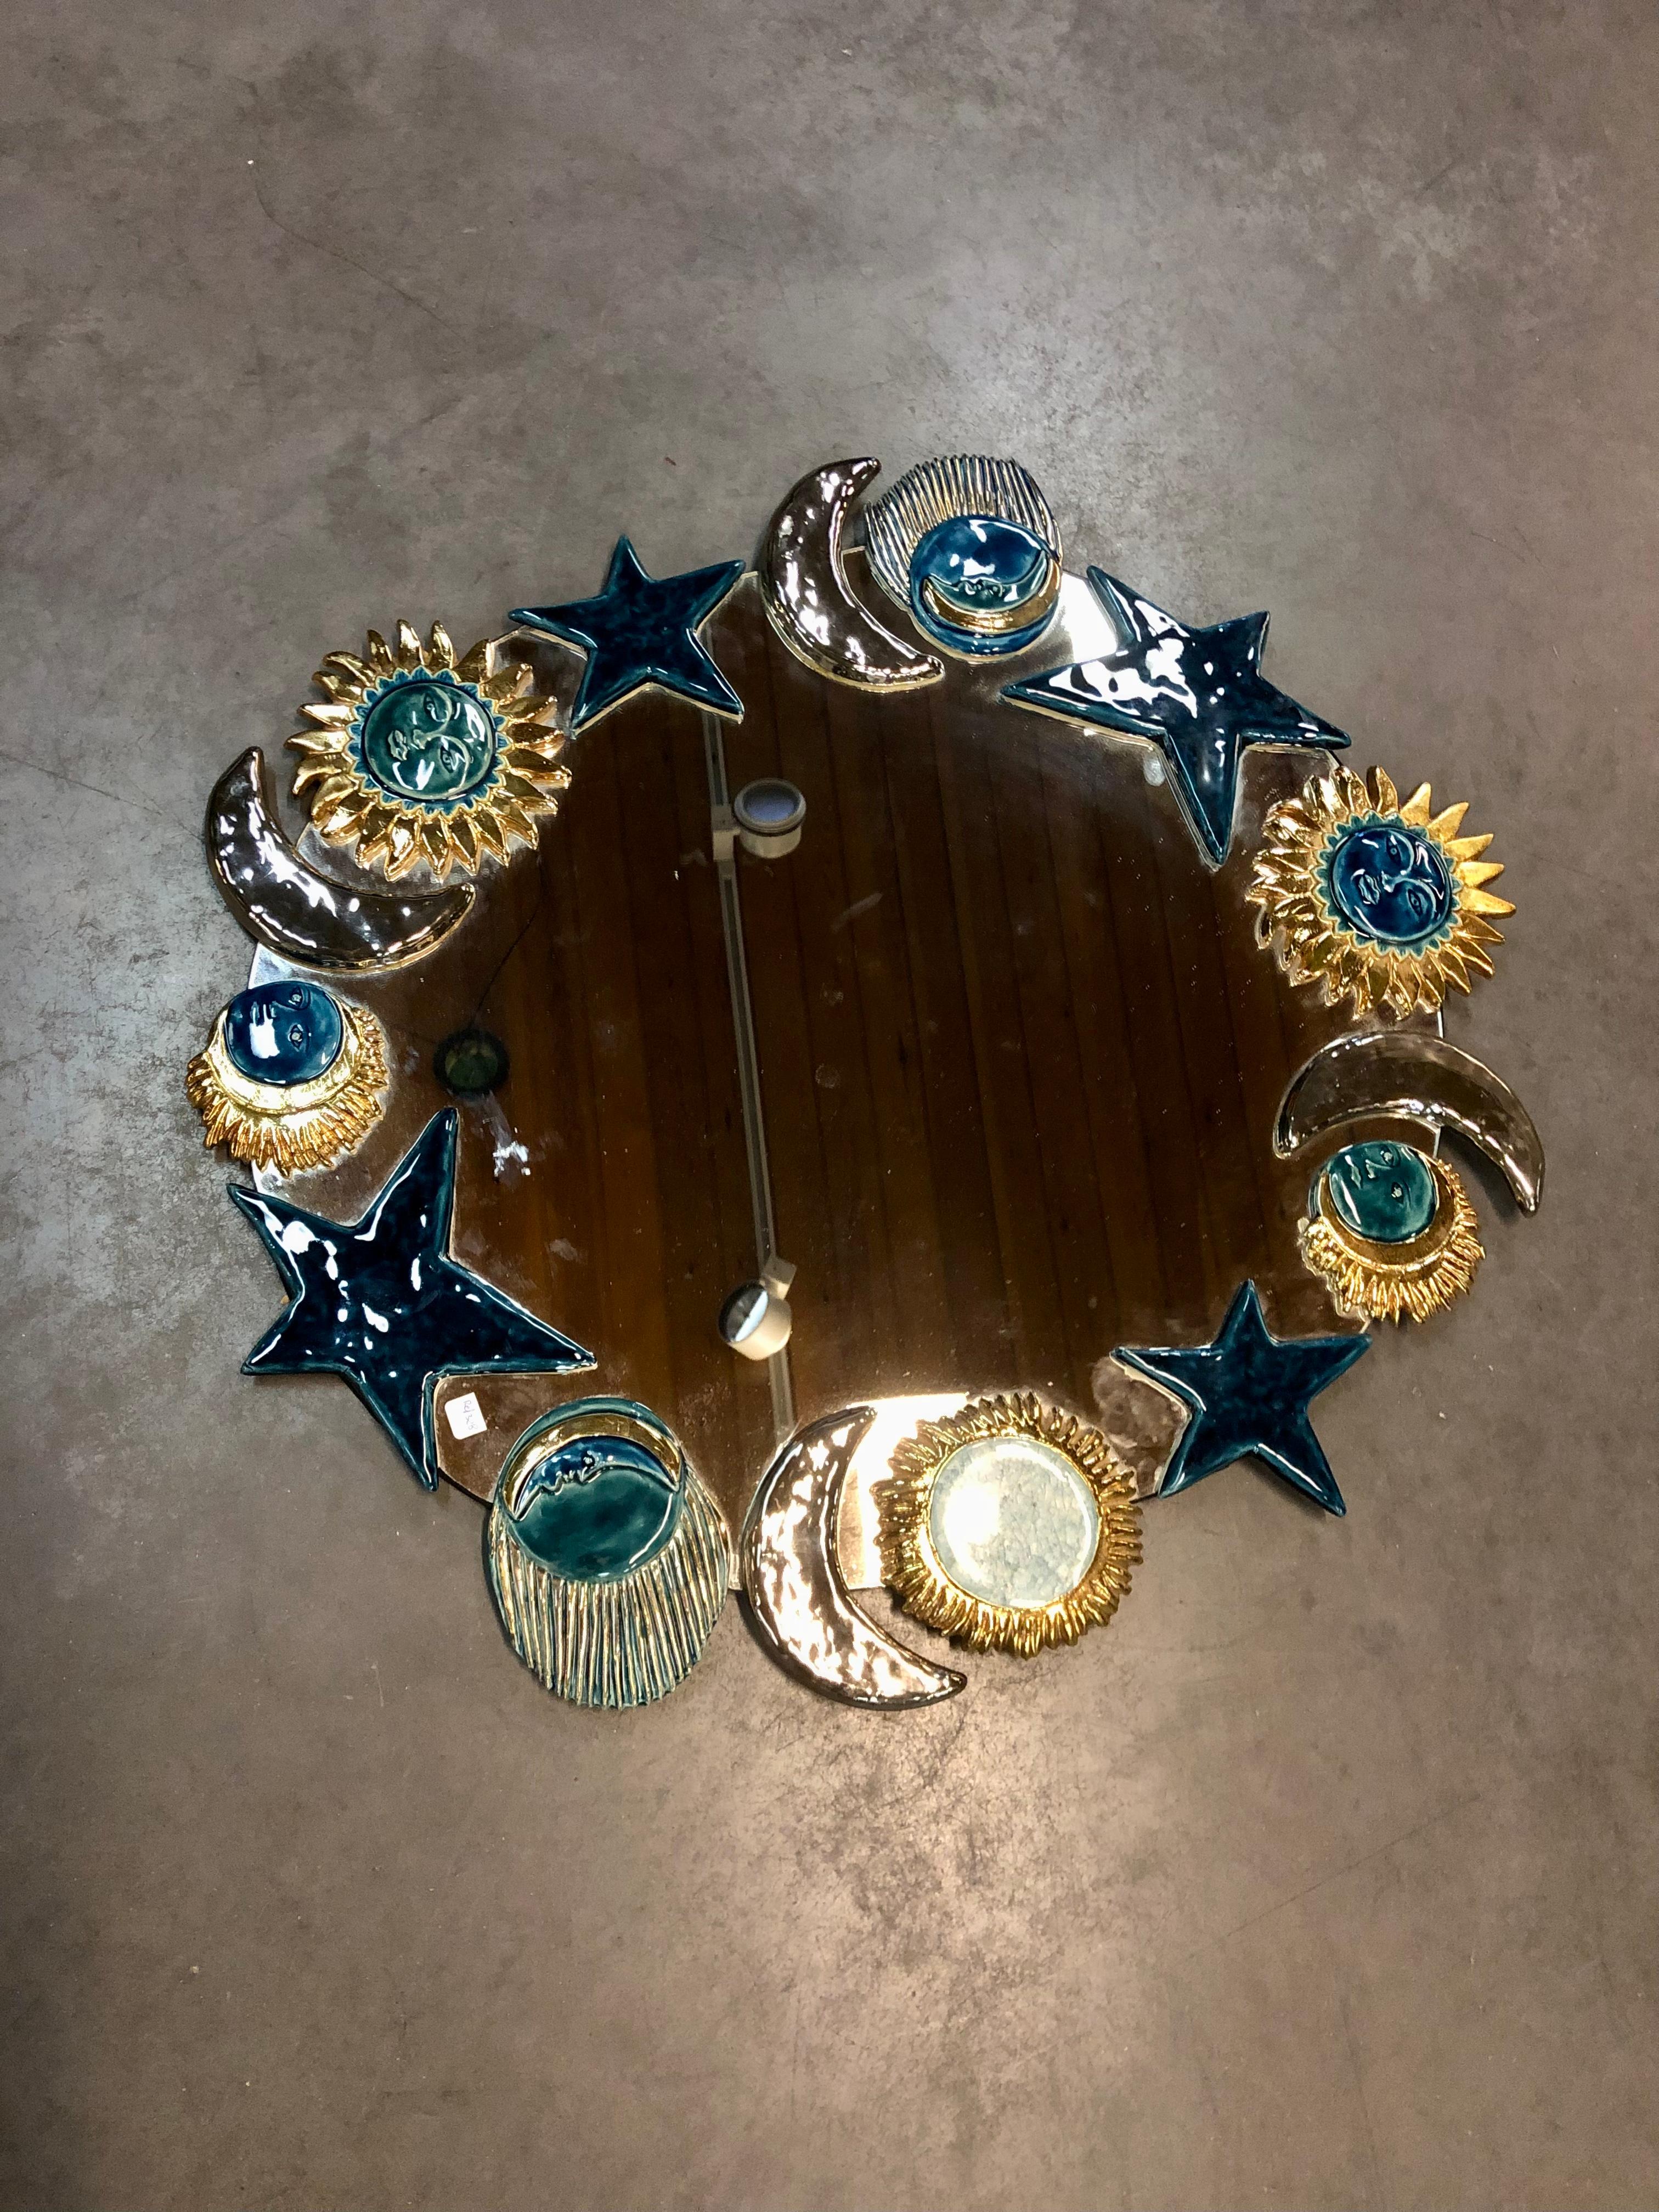 Important sunburst mirror from French atelier of  Mithe Espelt.
It’s made with enameled ceramic representing stylised moon sun and star.
Made and designed  by Marion de Crecy the daughter of Mithe Espelt .